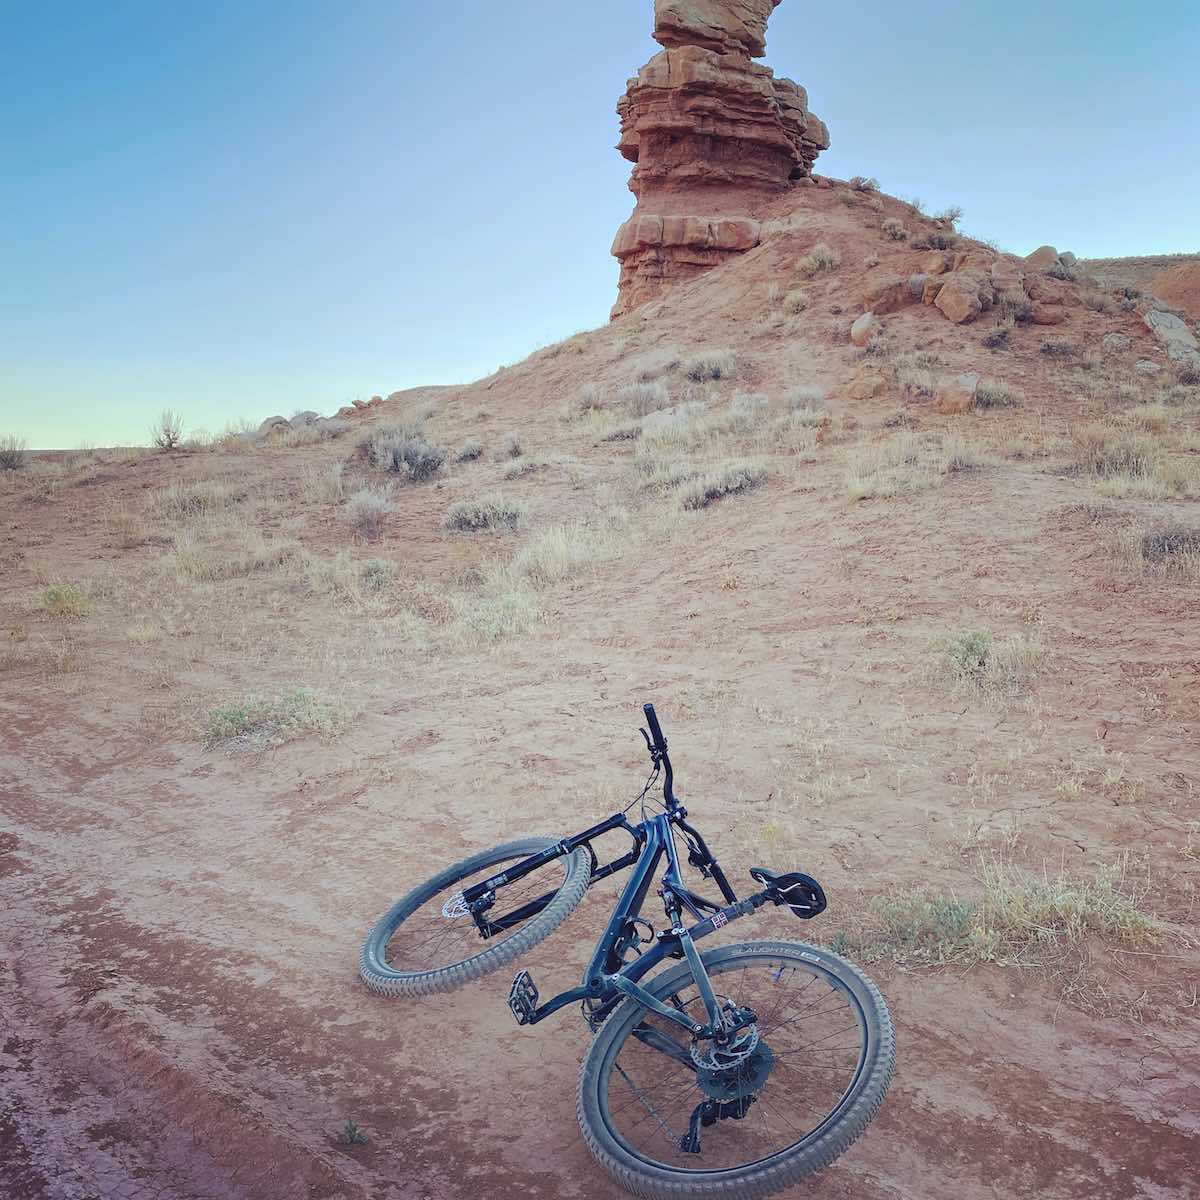 bikerumor pic of the day mountain bike laying on the side of the trail of mccoy flats in vernal utah the land is mostly red dirt with some scrub brush looking up to a hoodoo land feature.